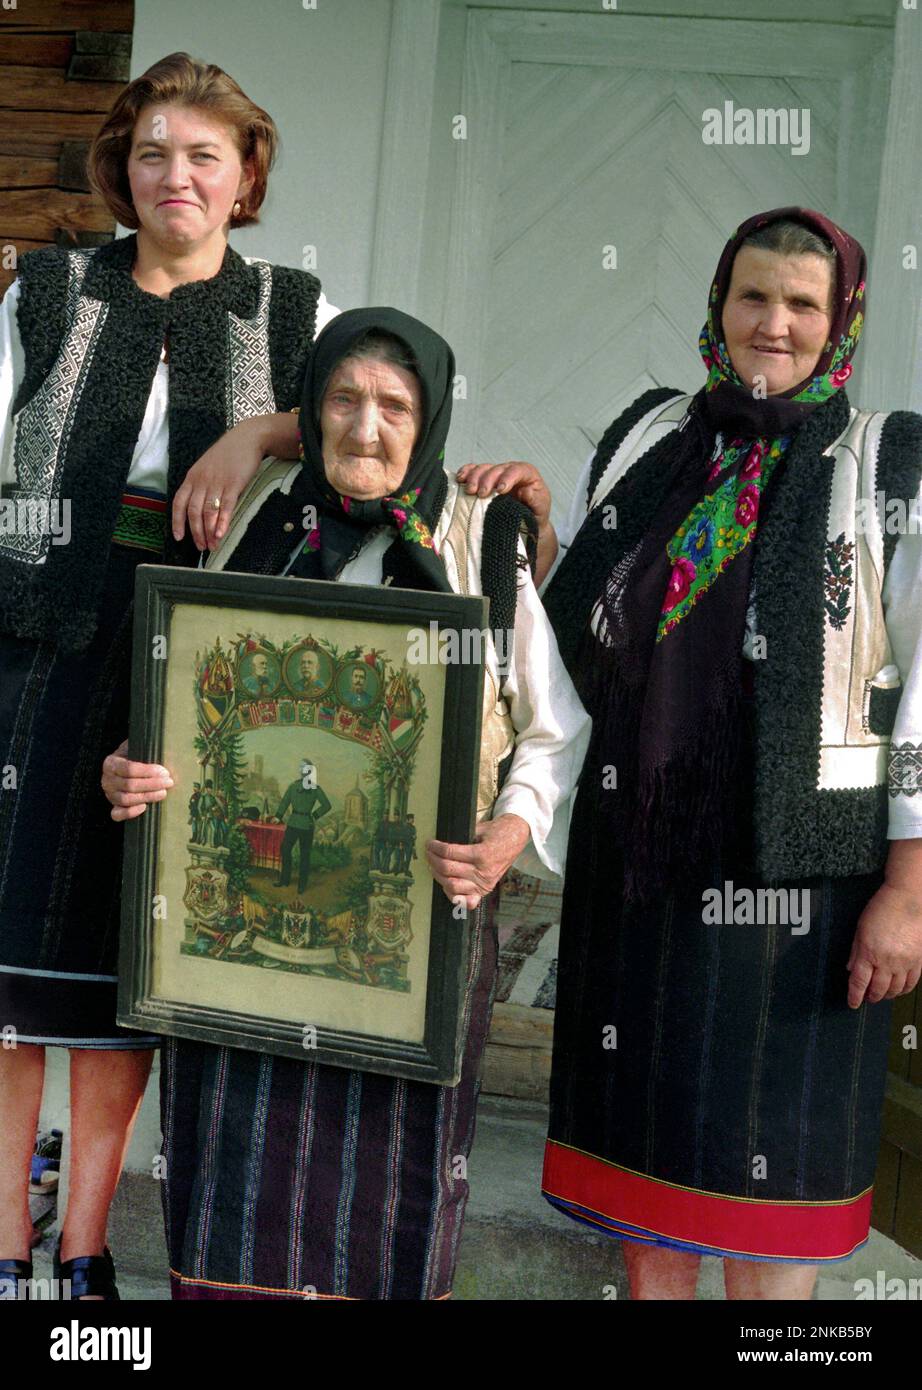 Suceava County, Romania, 1998. Three generations of women in a local family posing in their traditional costumes. The elderly woman is holding a framed printing portraying her husband as an infantry soldier in the Austro- Hungarian army. Stock Photo